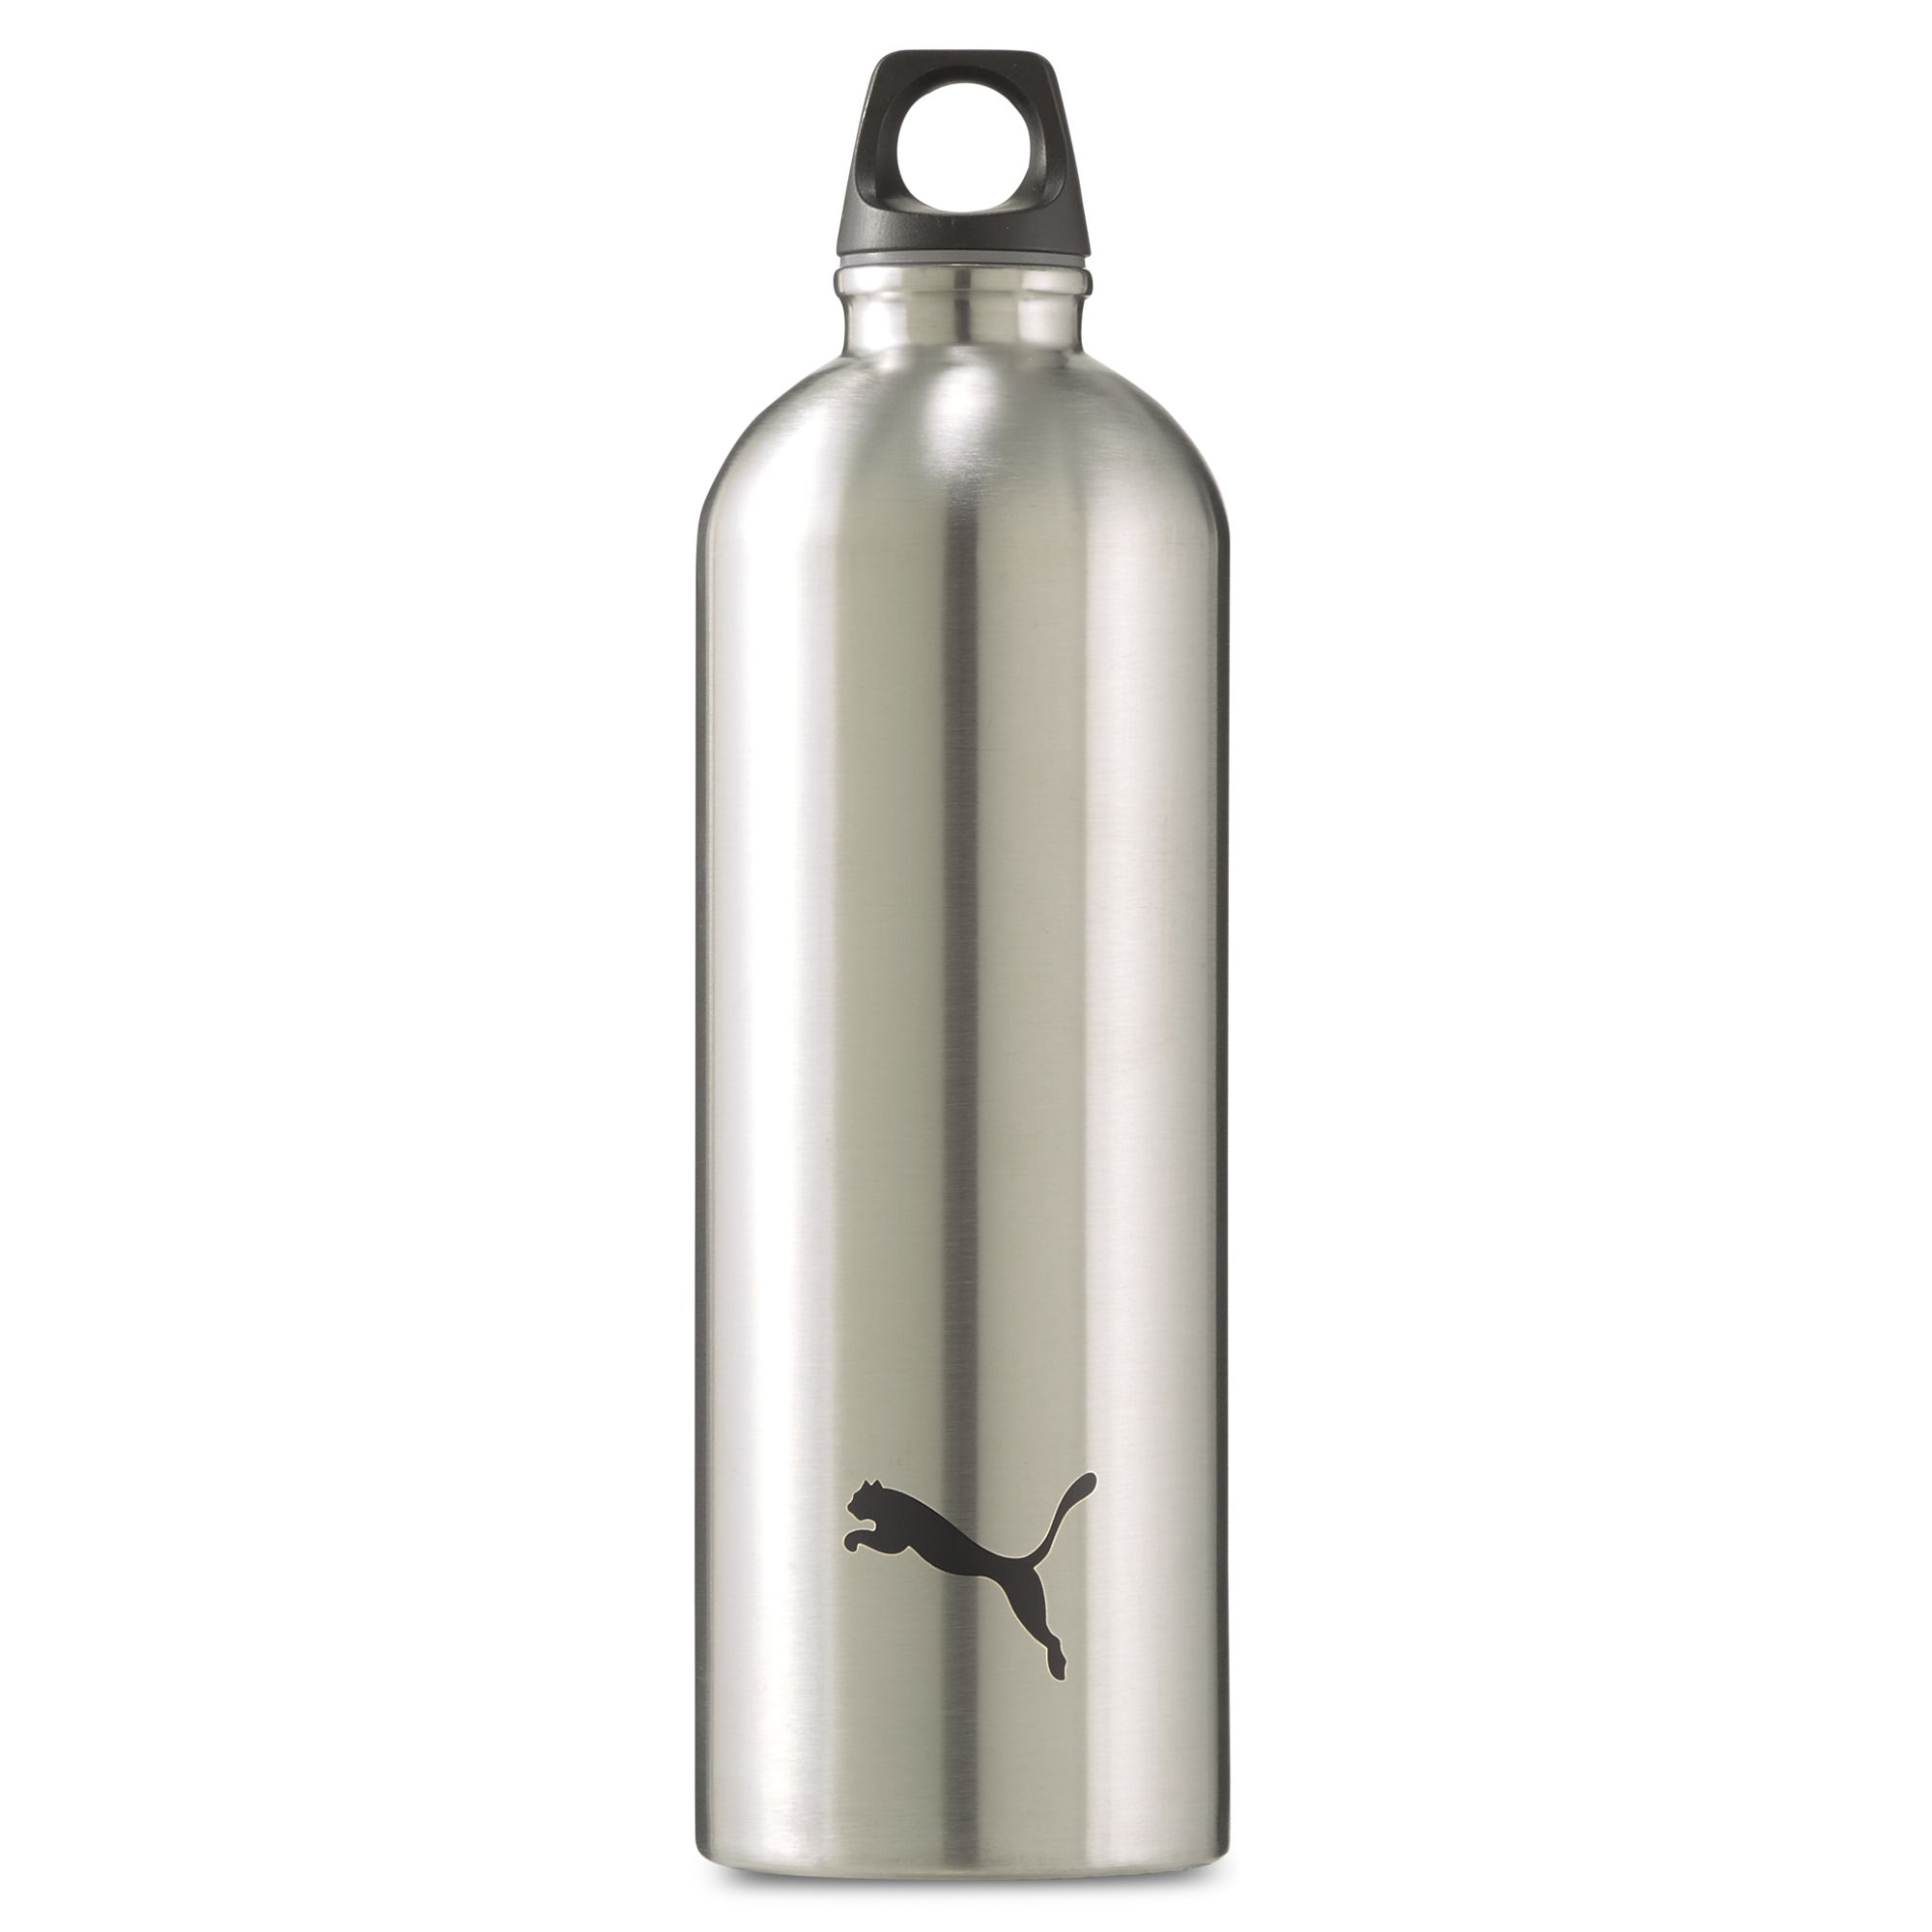 Puma TR Stainless Steel Metall-Trinkflasche